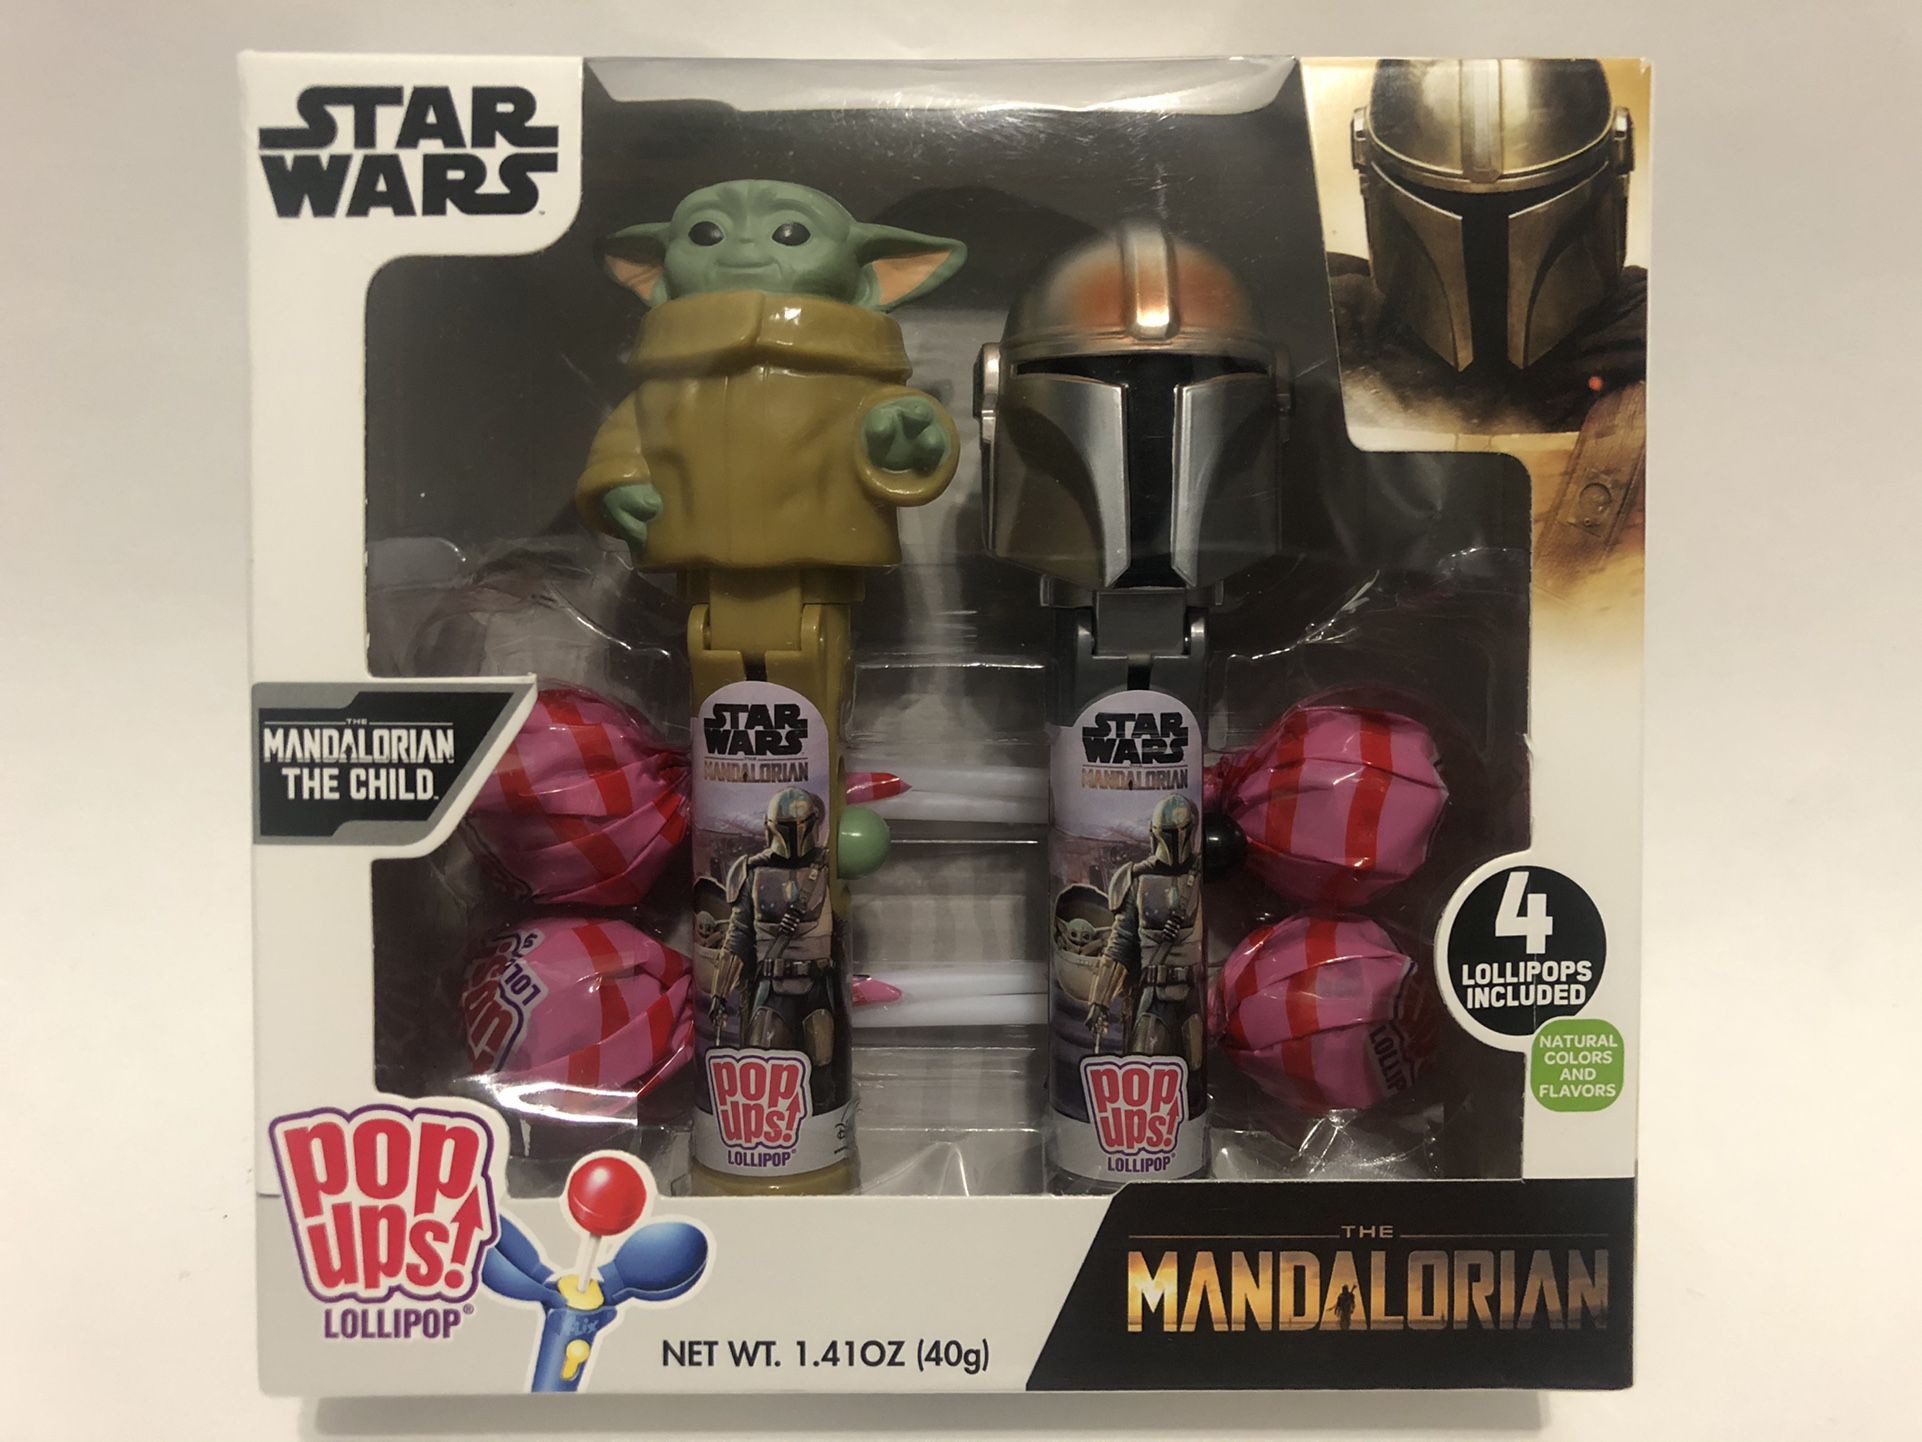 NEW Star Wars The Mandalorian and The Child Pop Ups Lollipops